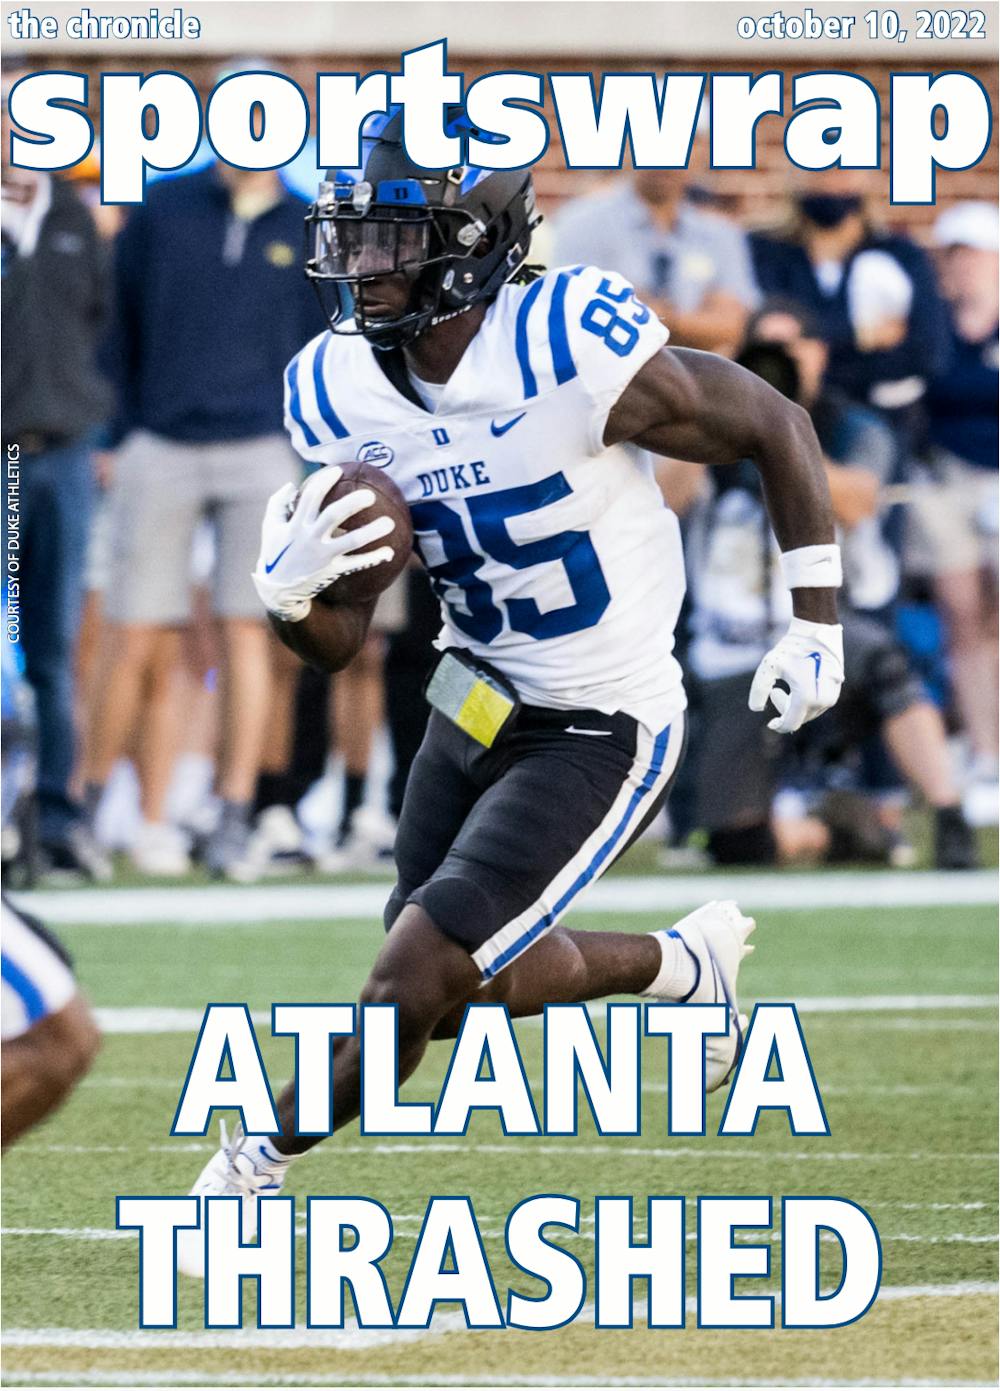 Duke football clawed its way back into Saturday's game at Georgia Tech but came out on the wrong side of things in overtime.